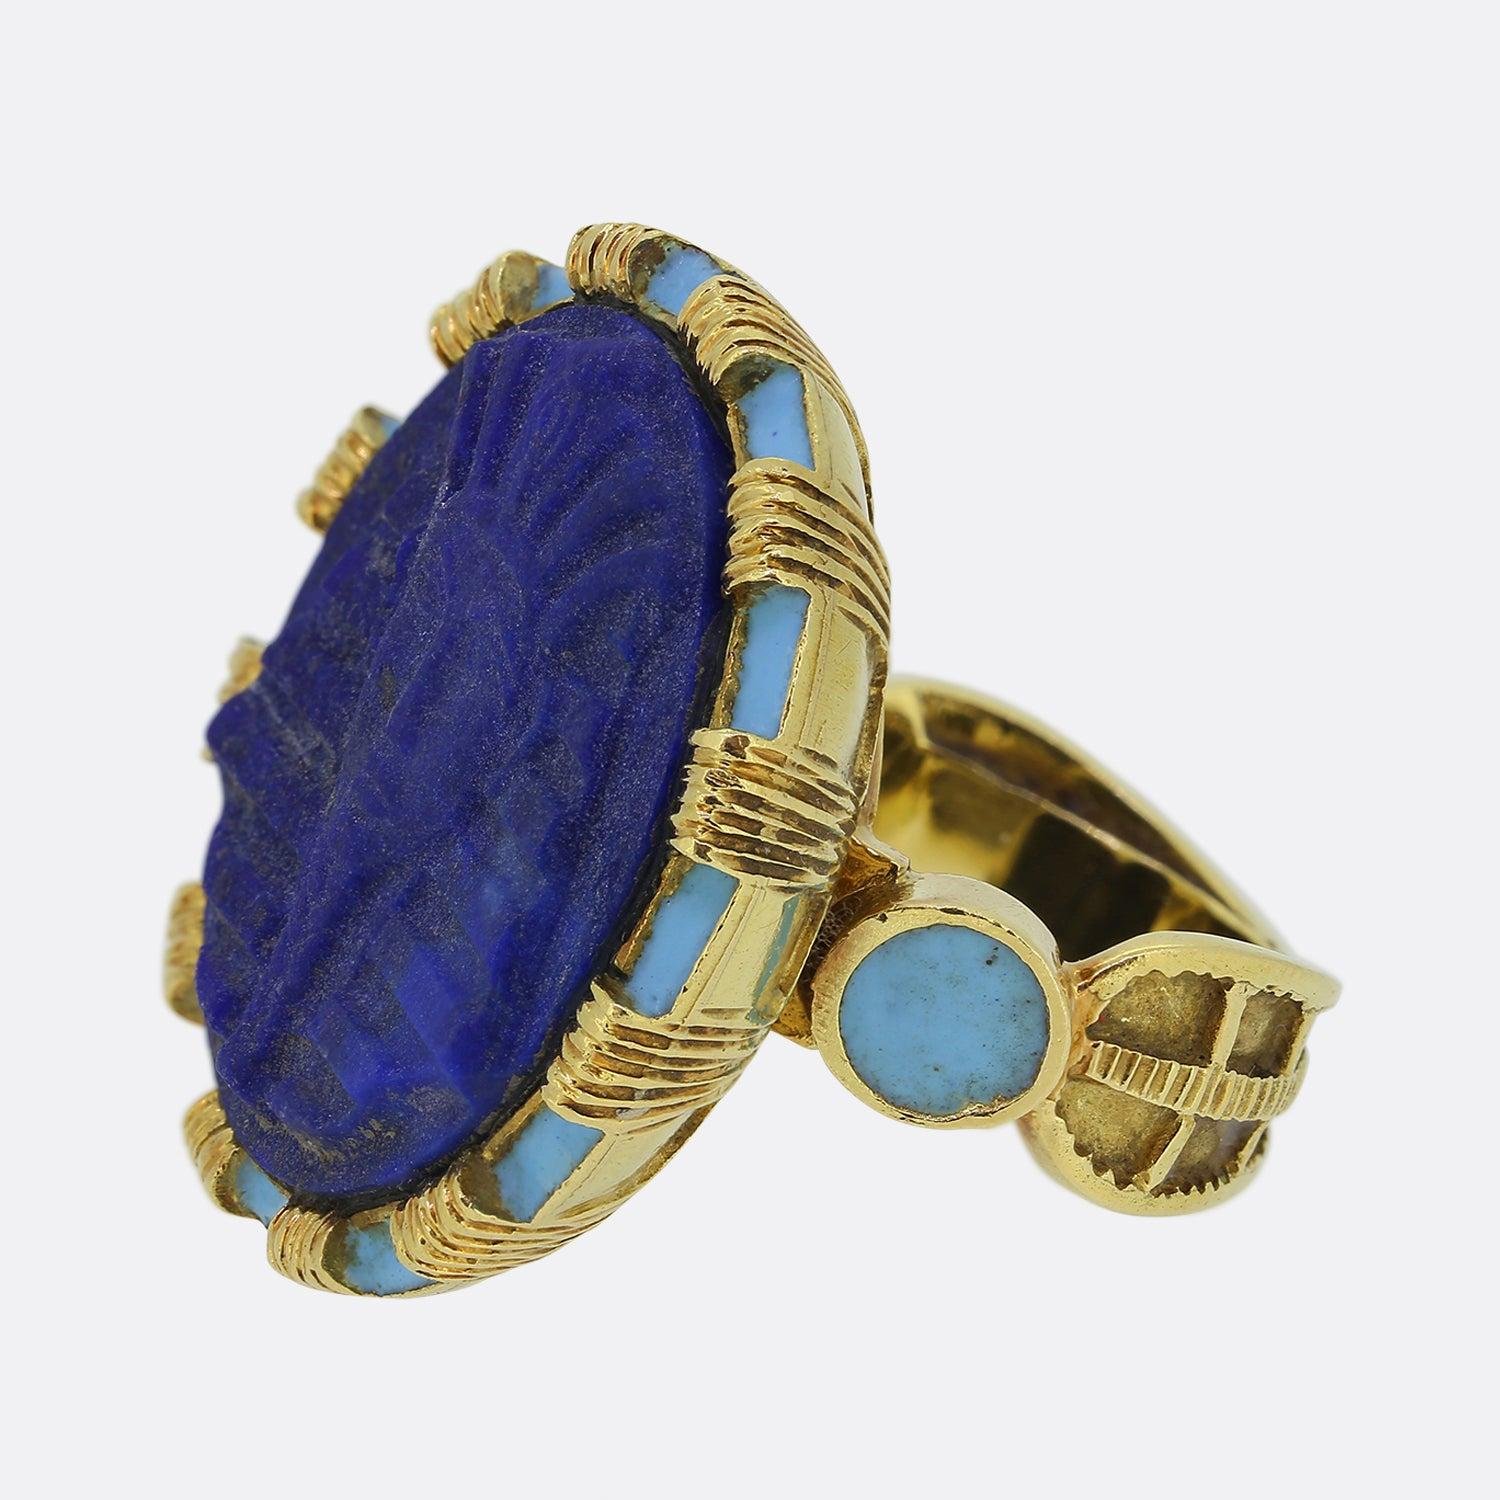 Here we have a vintage 18ct yellow gold Egyptian revival ring. The face of the piece showcases a carved lapis lazuli featuring Tutankhamun's head. Surrounding the Lapis there is a turquoise blue enamel border and a carved gold shank. The ring is a